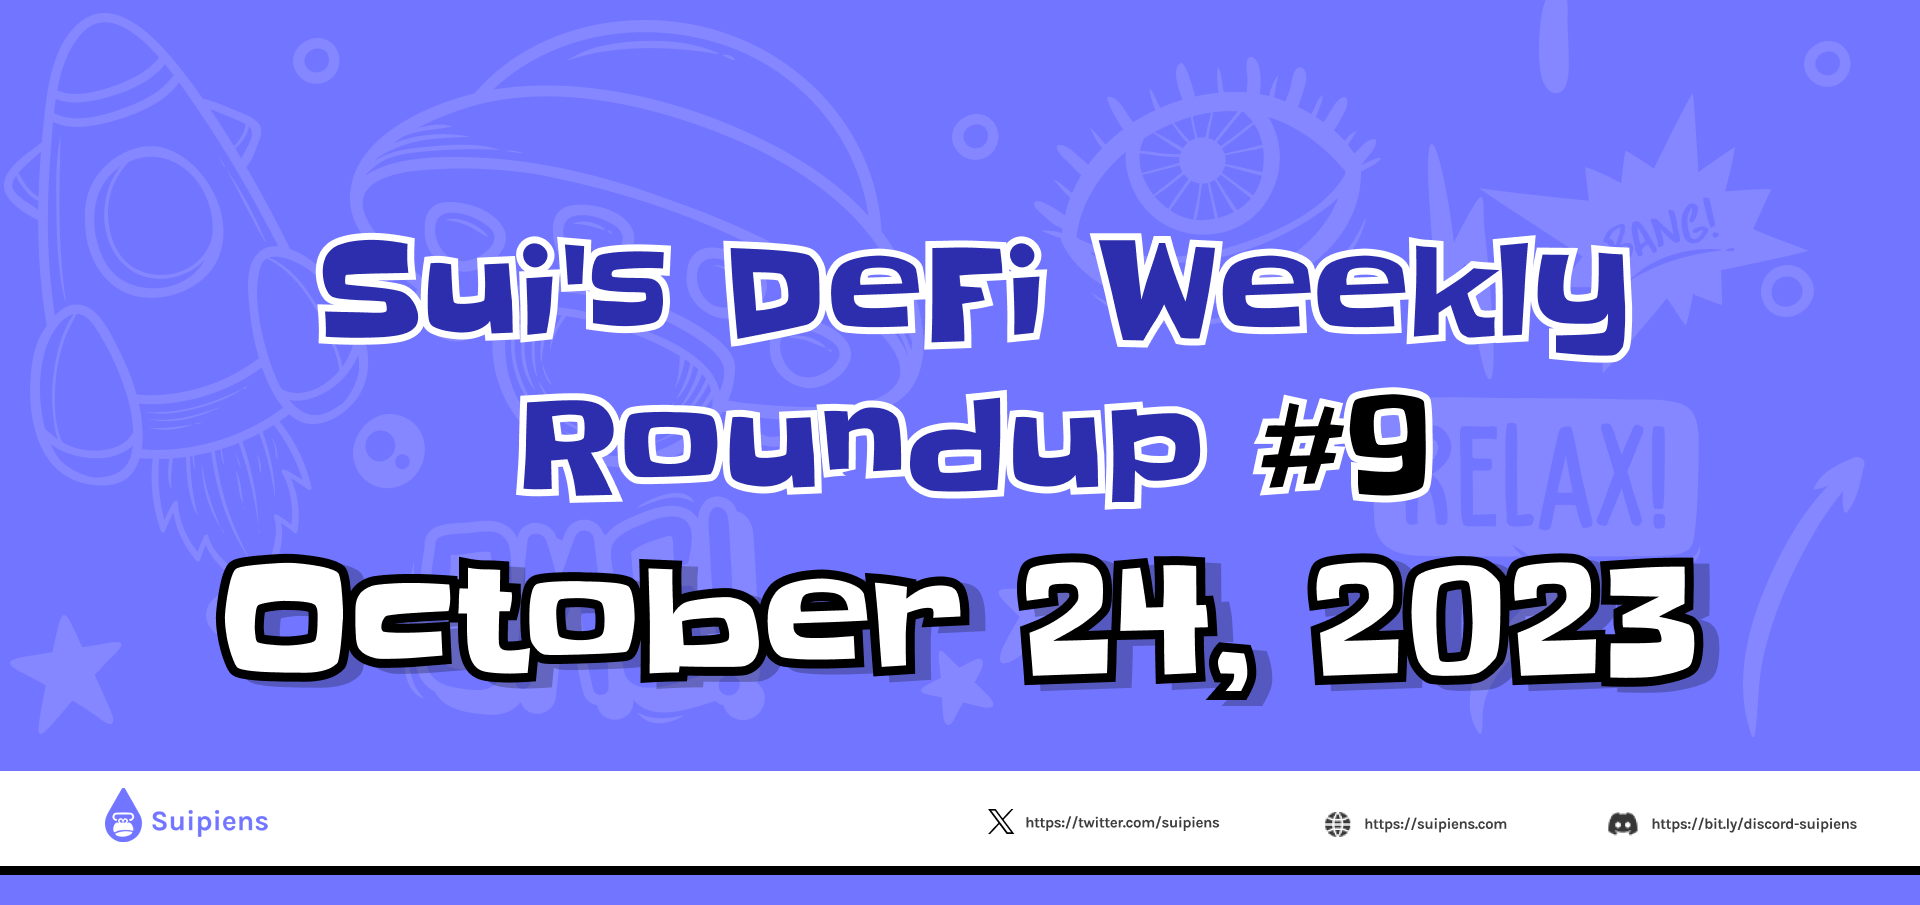 Sui's DeFi Weekly Roundup #9 (October 24, 2023)